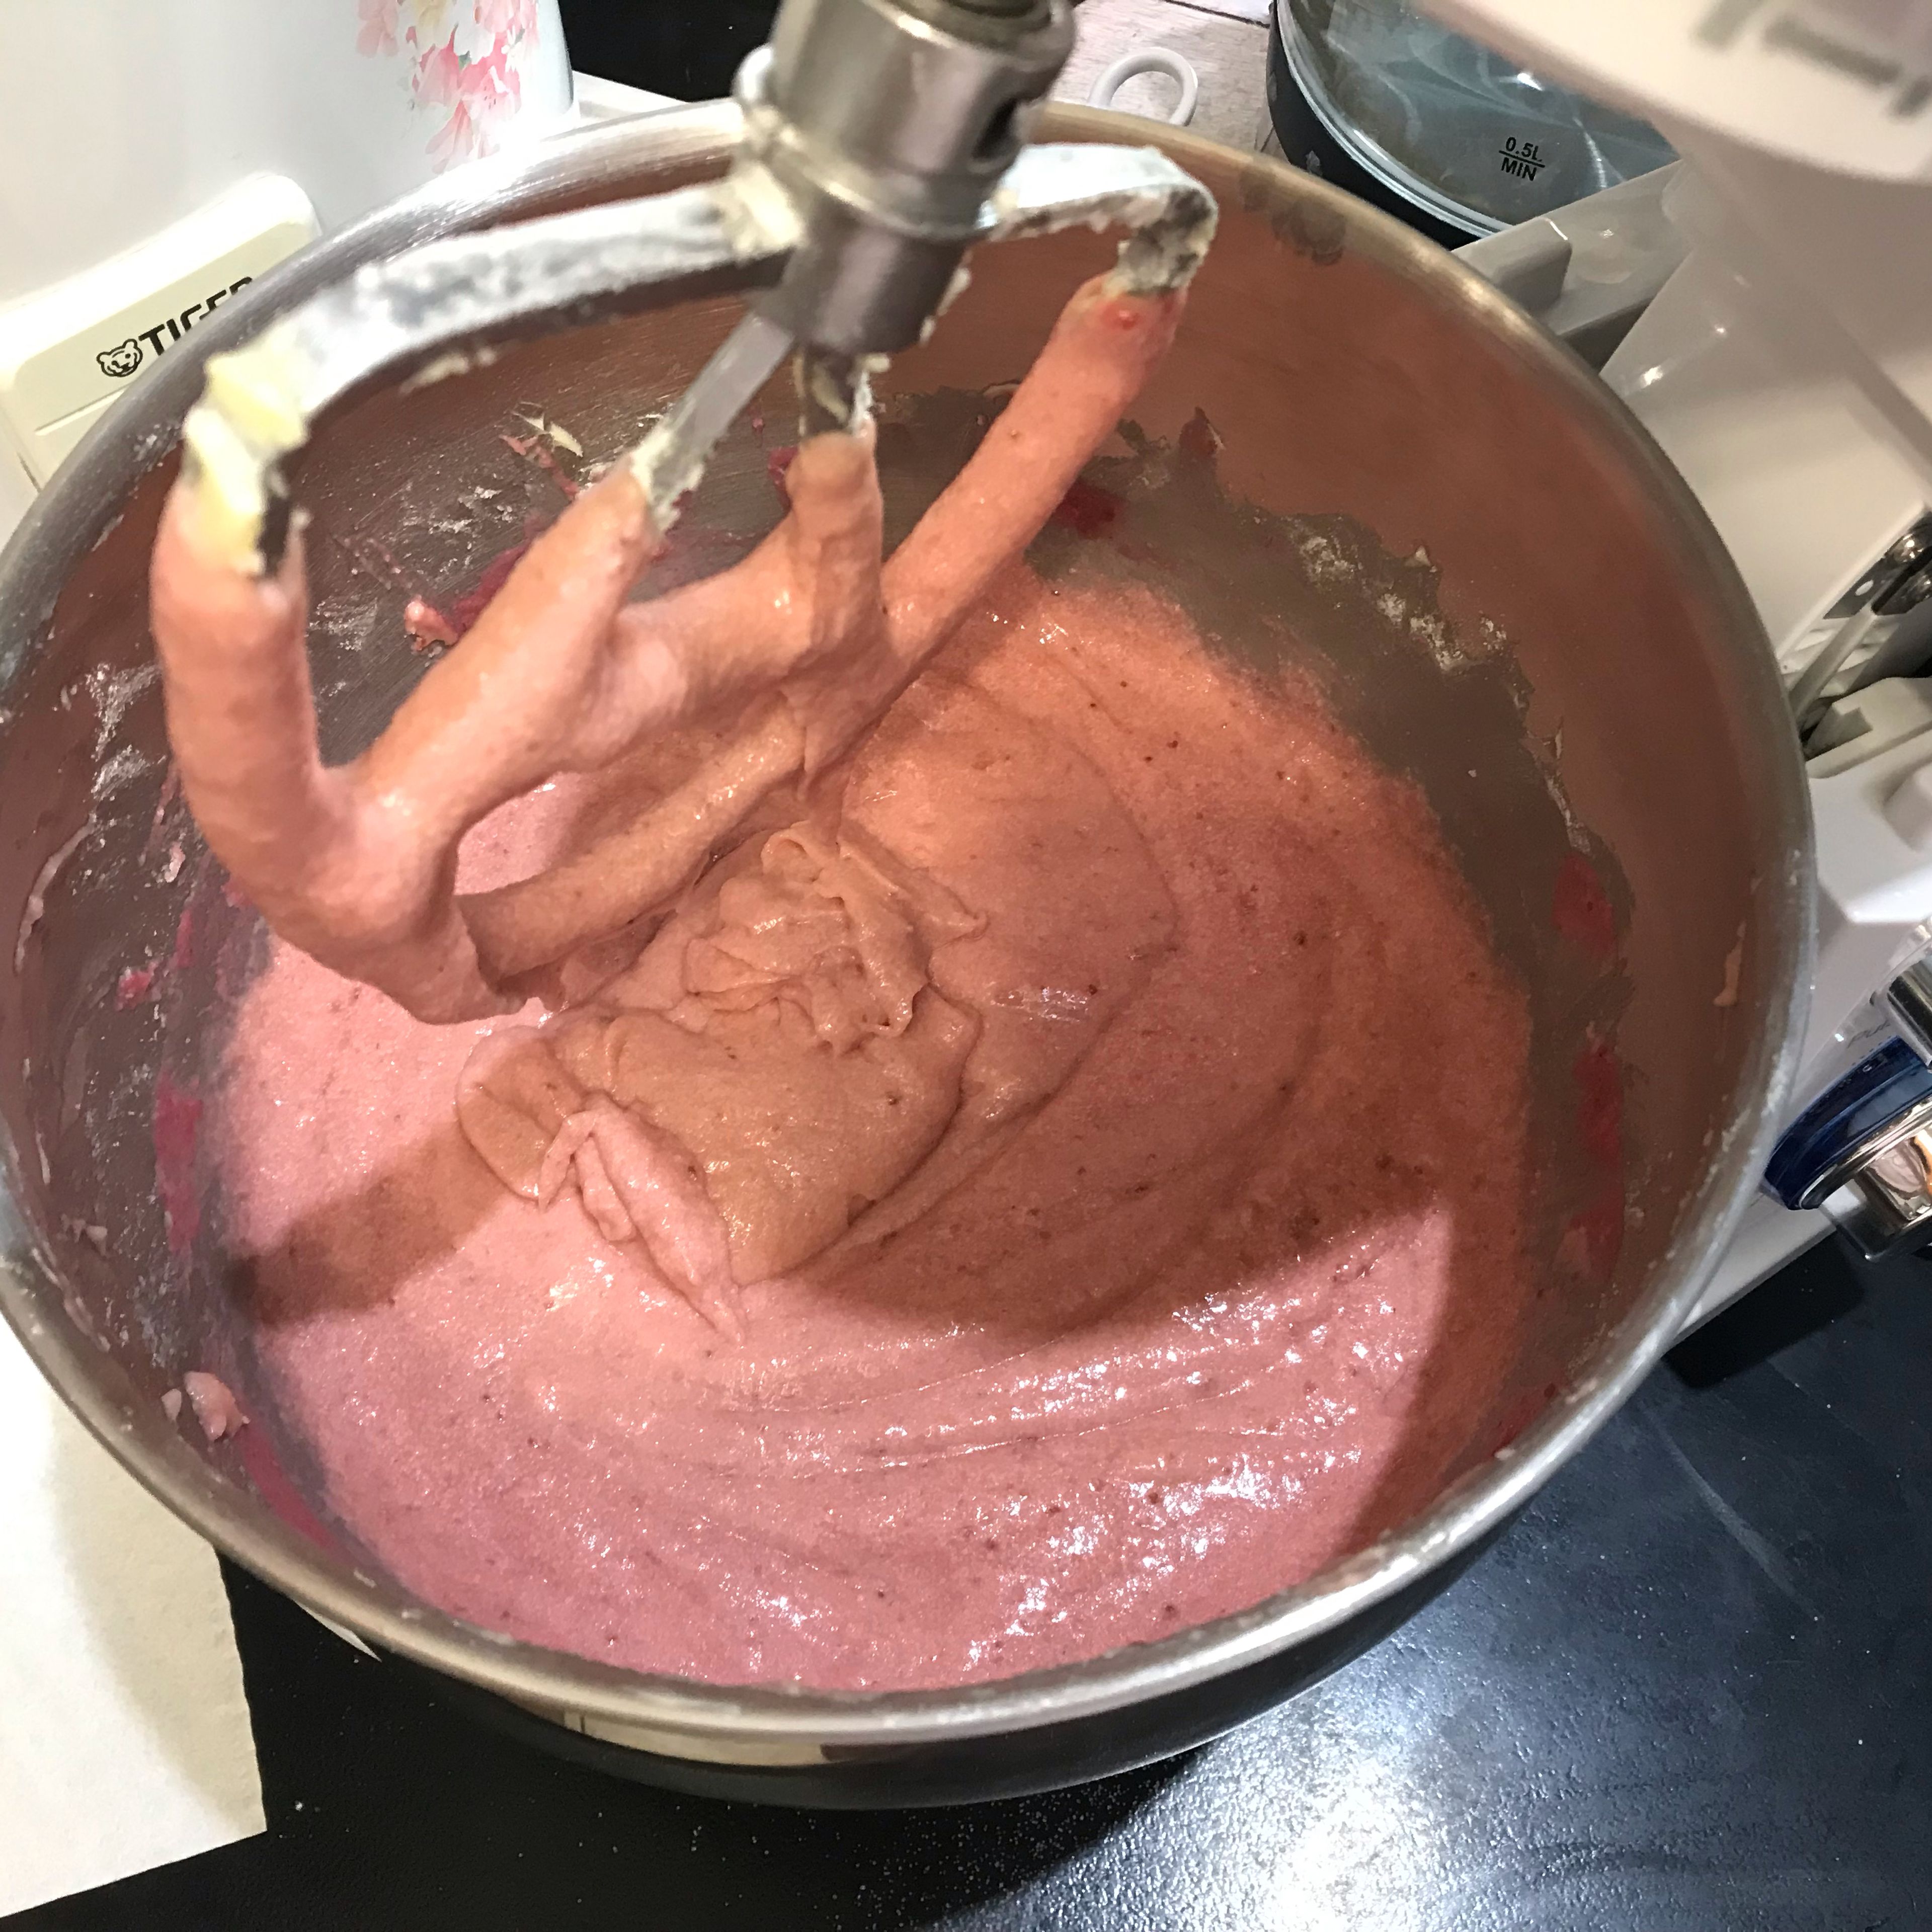 Repeat the process 2 more times with the remaining flour mixture and milk mixture. When the batter appears blended, stop the mixer and scrape the sides of the bowl with a rubber spatula. If it looks like ice cream, you did it right!